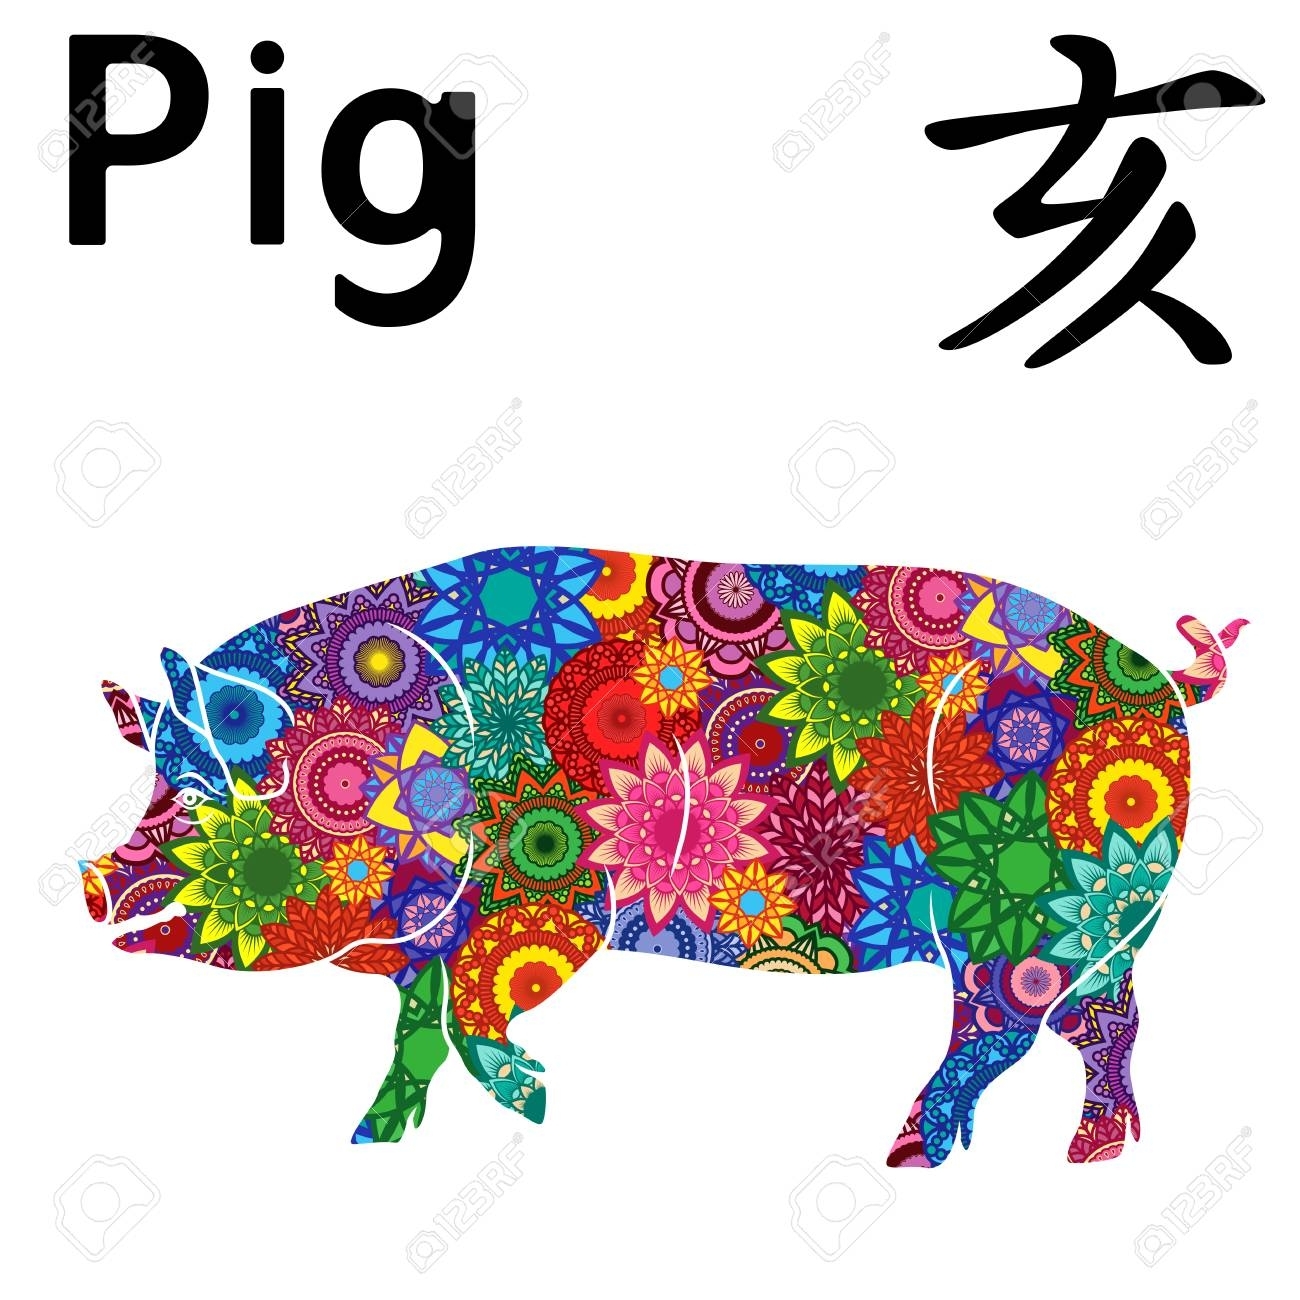 Big Pig, Chinese Zodiac Sign, Fixed Element Water, Symbol Of..